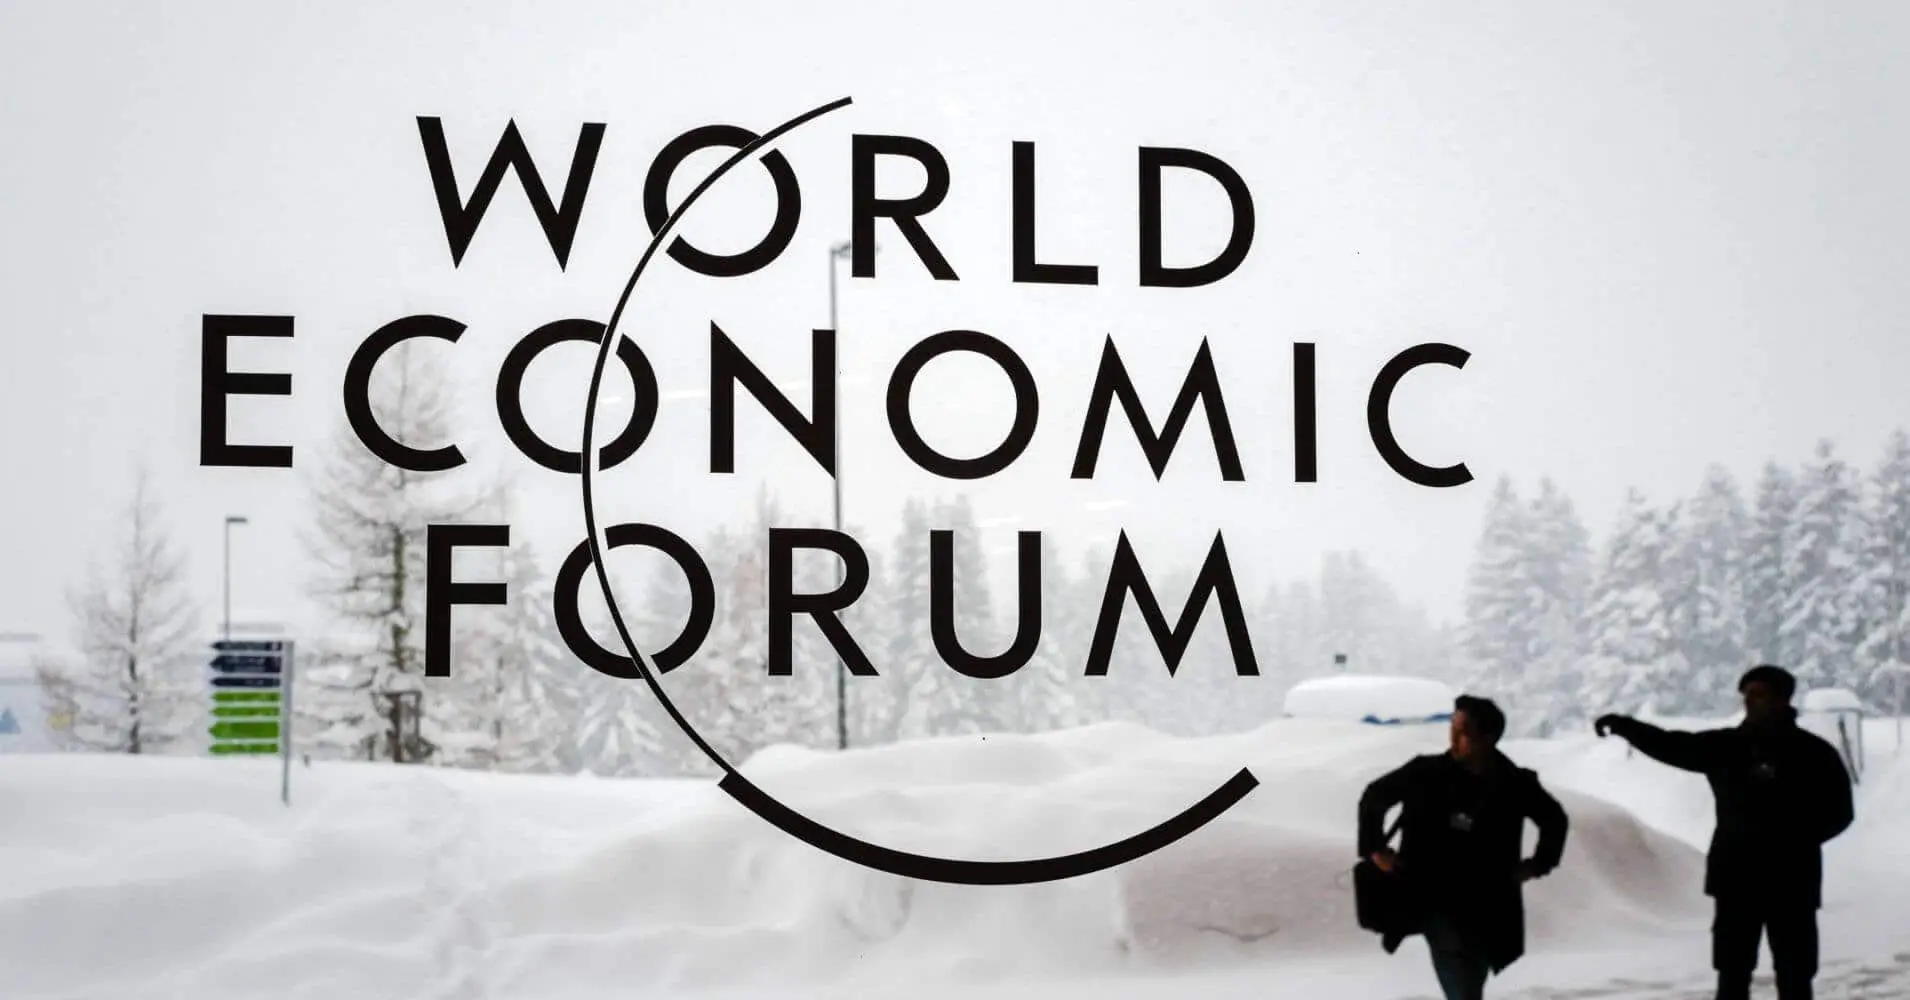 Business Elites adopt Somber Tone in Davos this Year